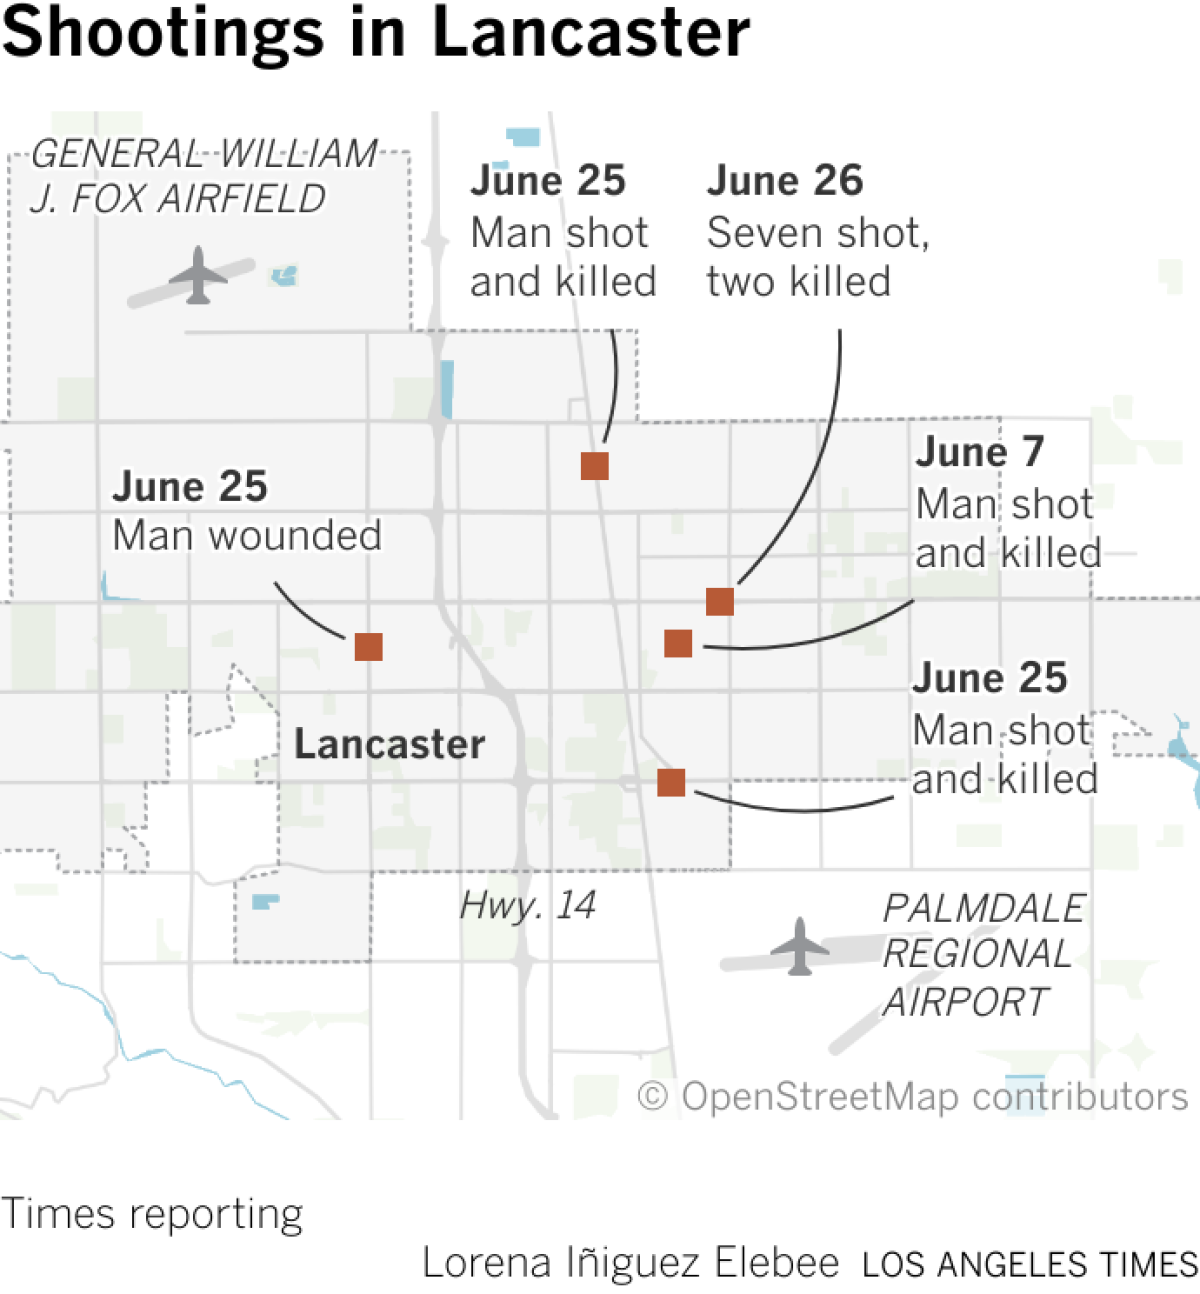 Map of Lancaster, California showing five locations where shootings took place in June.